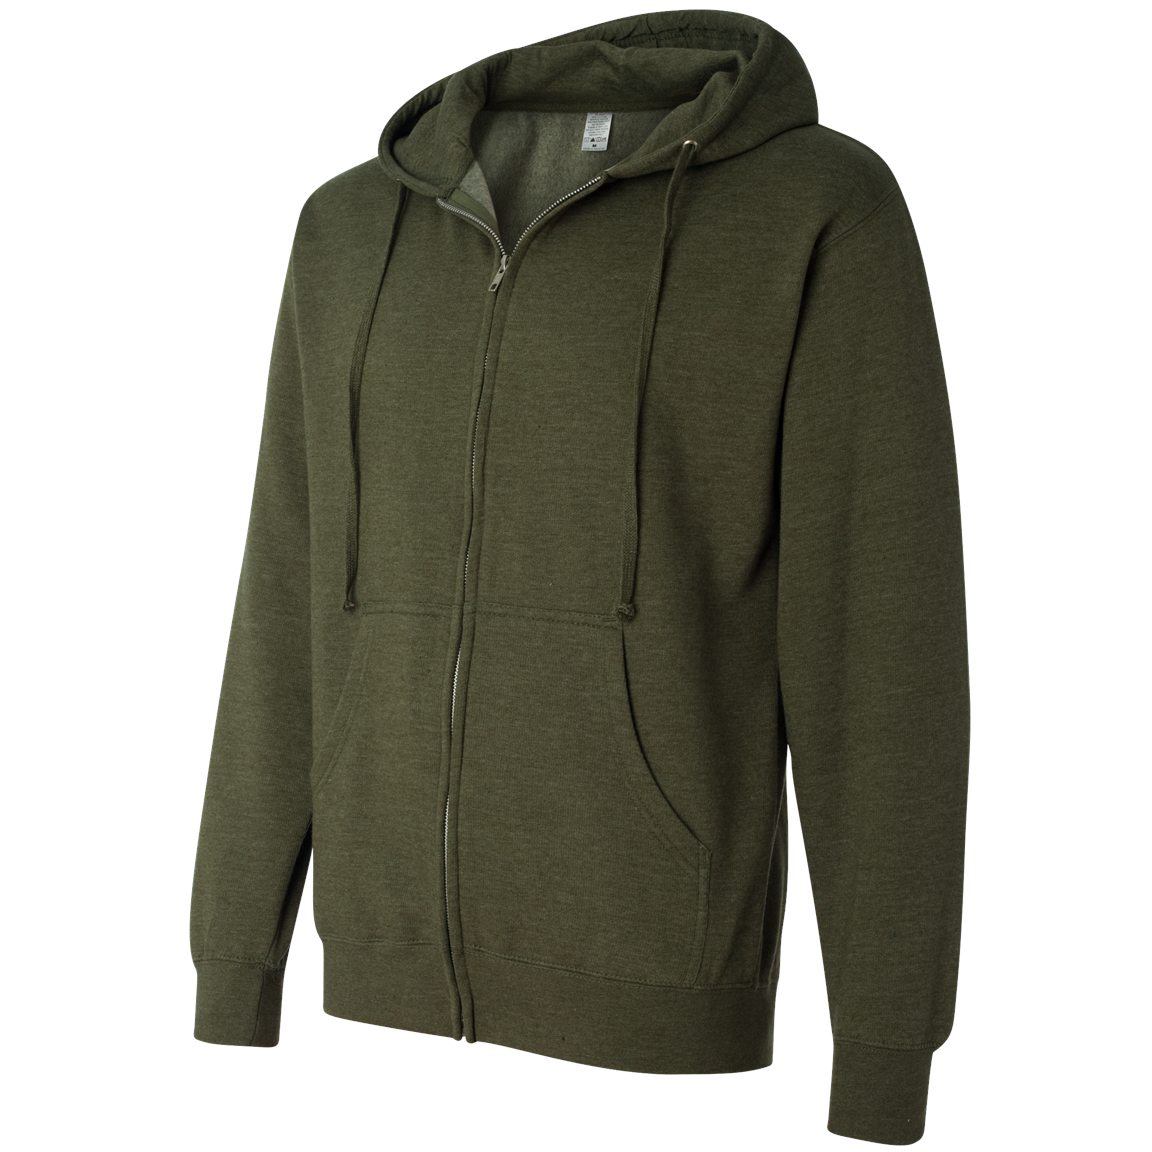 Independent Trading Co. SS4500Z Midweight Full-Zip Hooded Sweatshirt ...